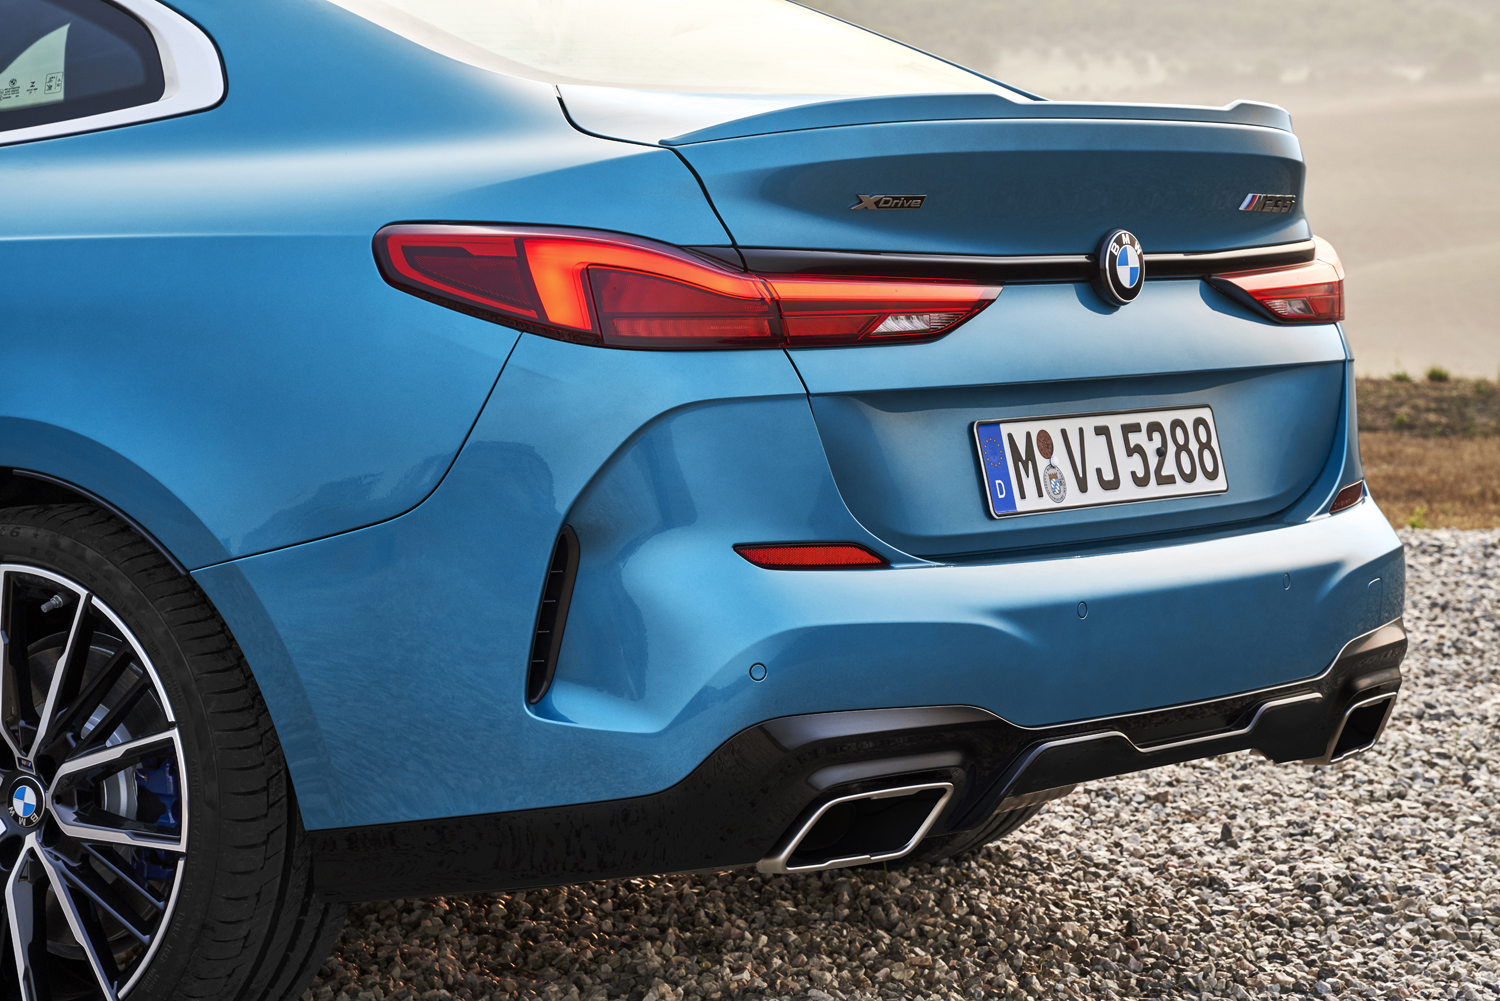 2020 bmw 228i m235i gran coupe unveiled as entry level sedans 2 series gc off 10